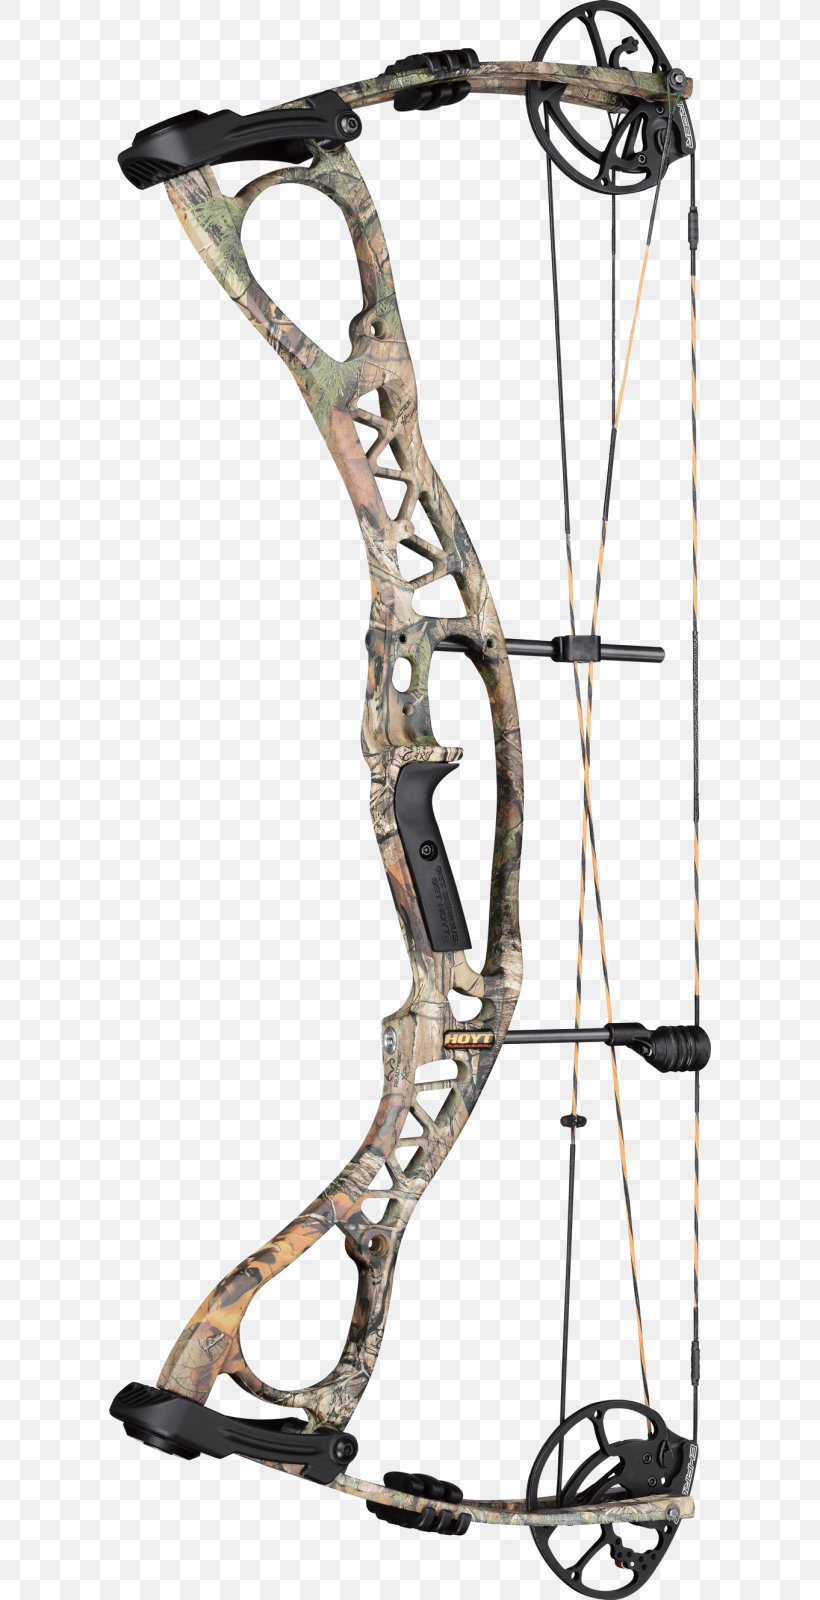 Compound Bows Bow And Arrow Bear Archery, PNG, 602x1600px, Compound Bows, Archery, Bear Archery, Bow, Bow And Arrow Download Free